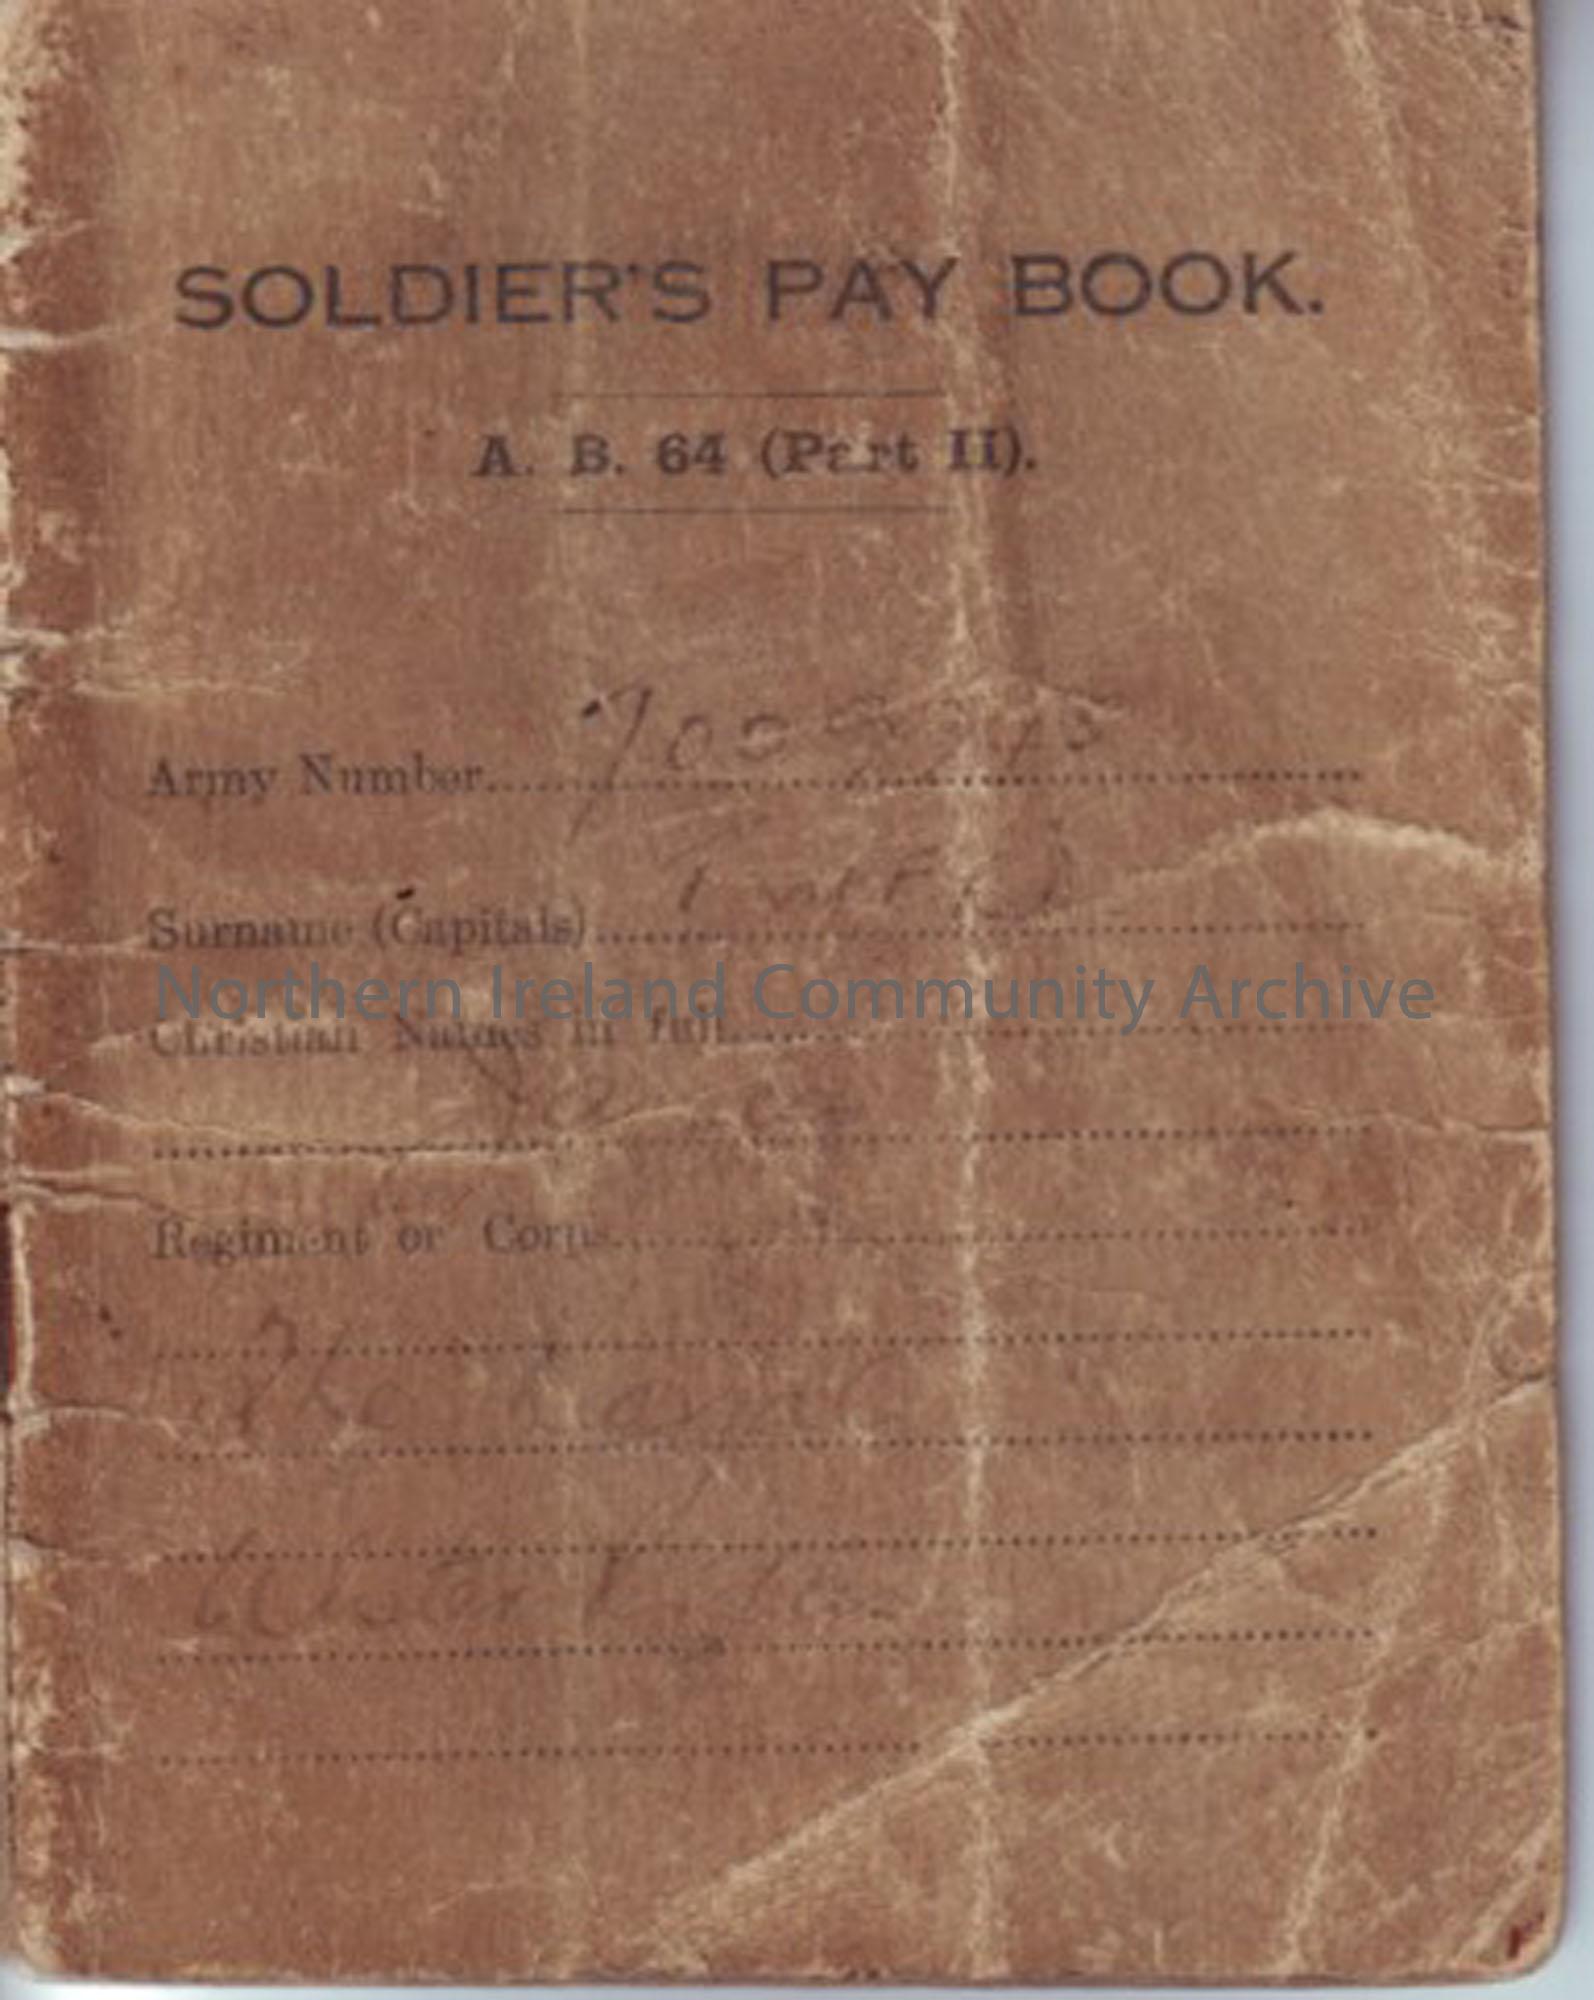 Soldiers’ Pay Book belonging to James Tweed. Brown with black writing and a form on the cover.